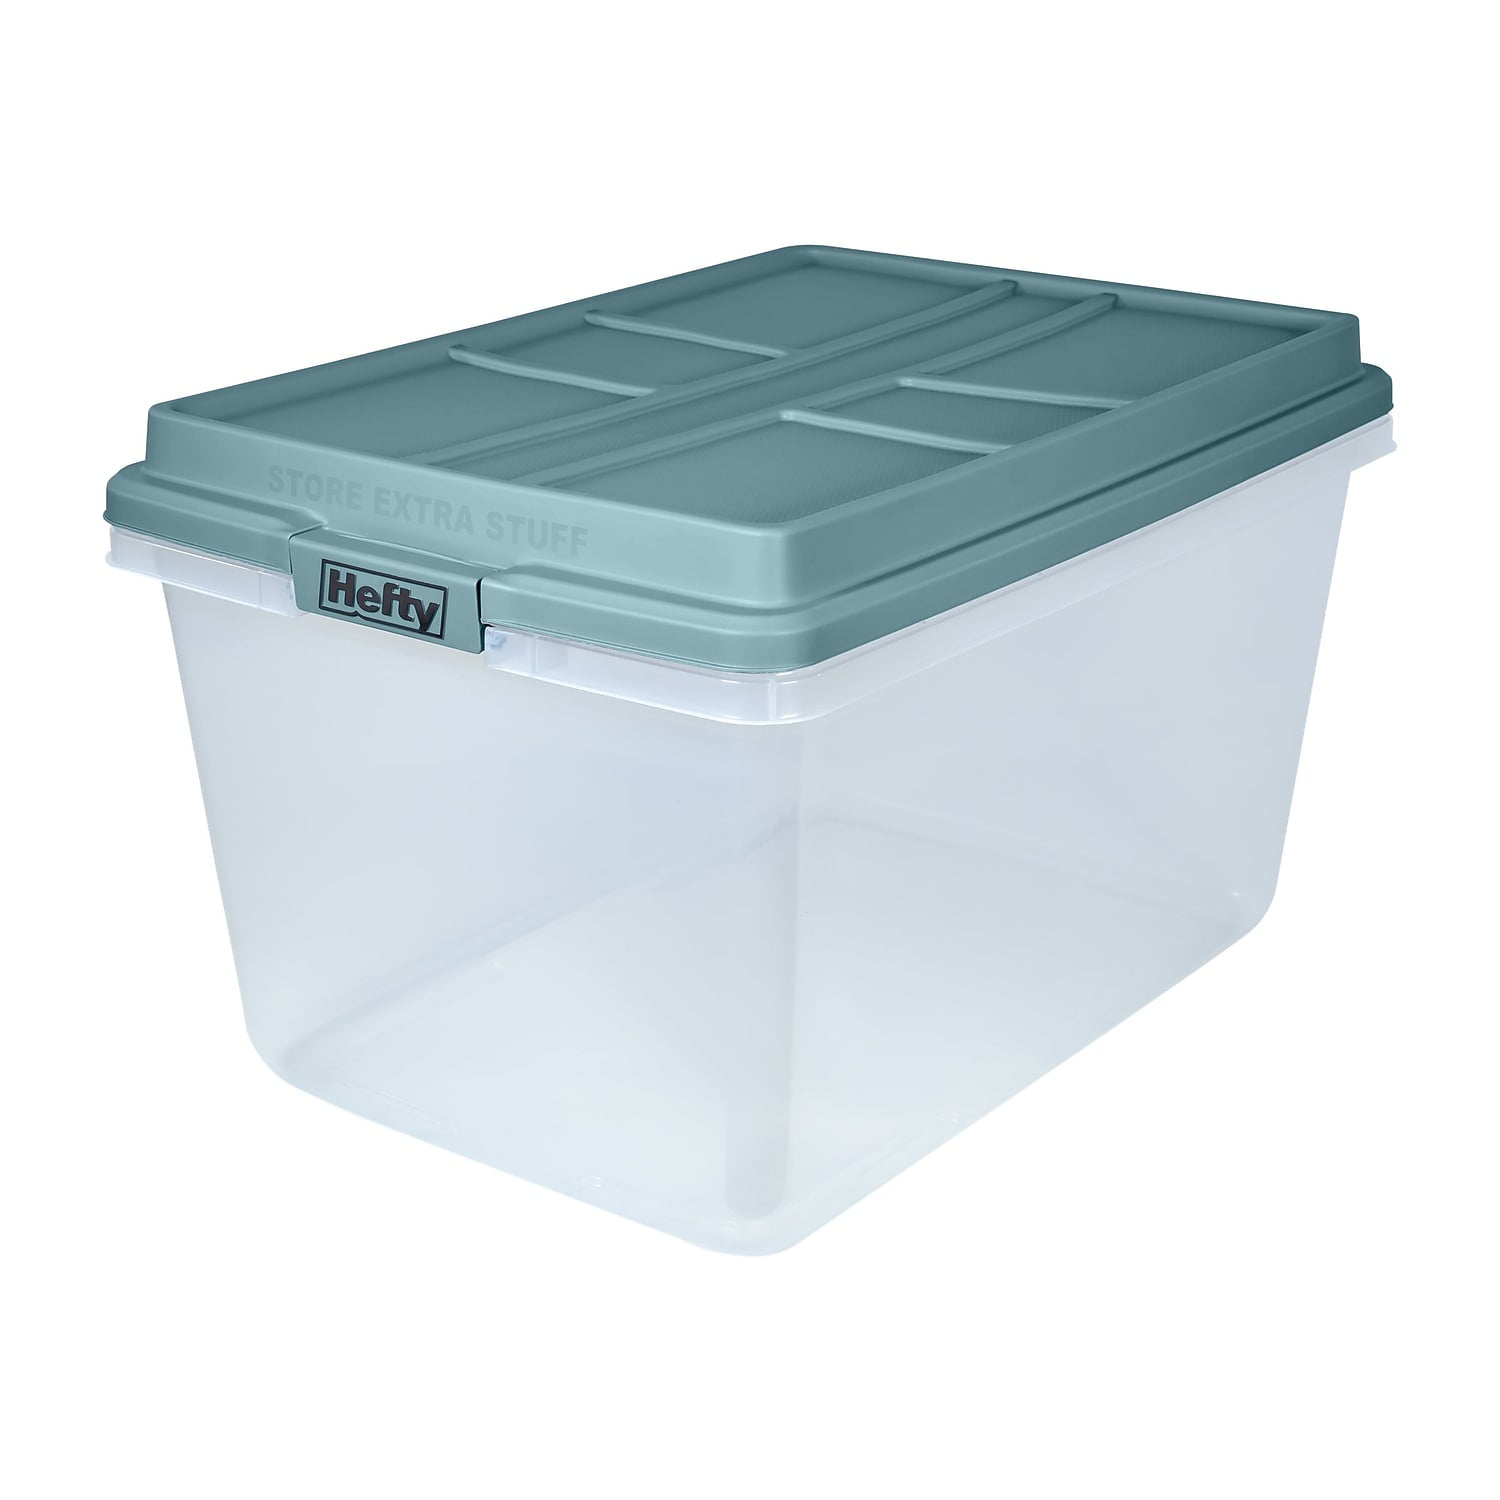 Hefty storage bin with hinged lid.10a - Lil Dusty Online Auctions